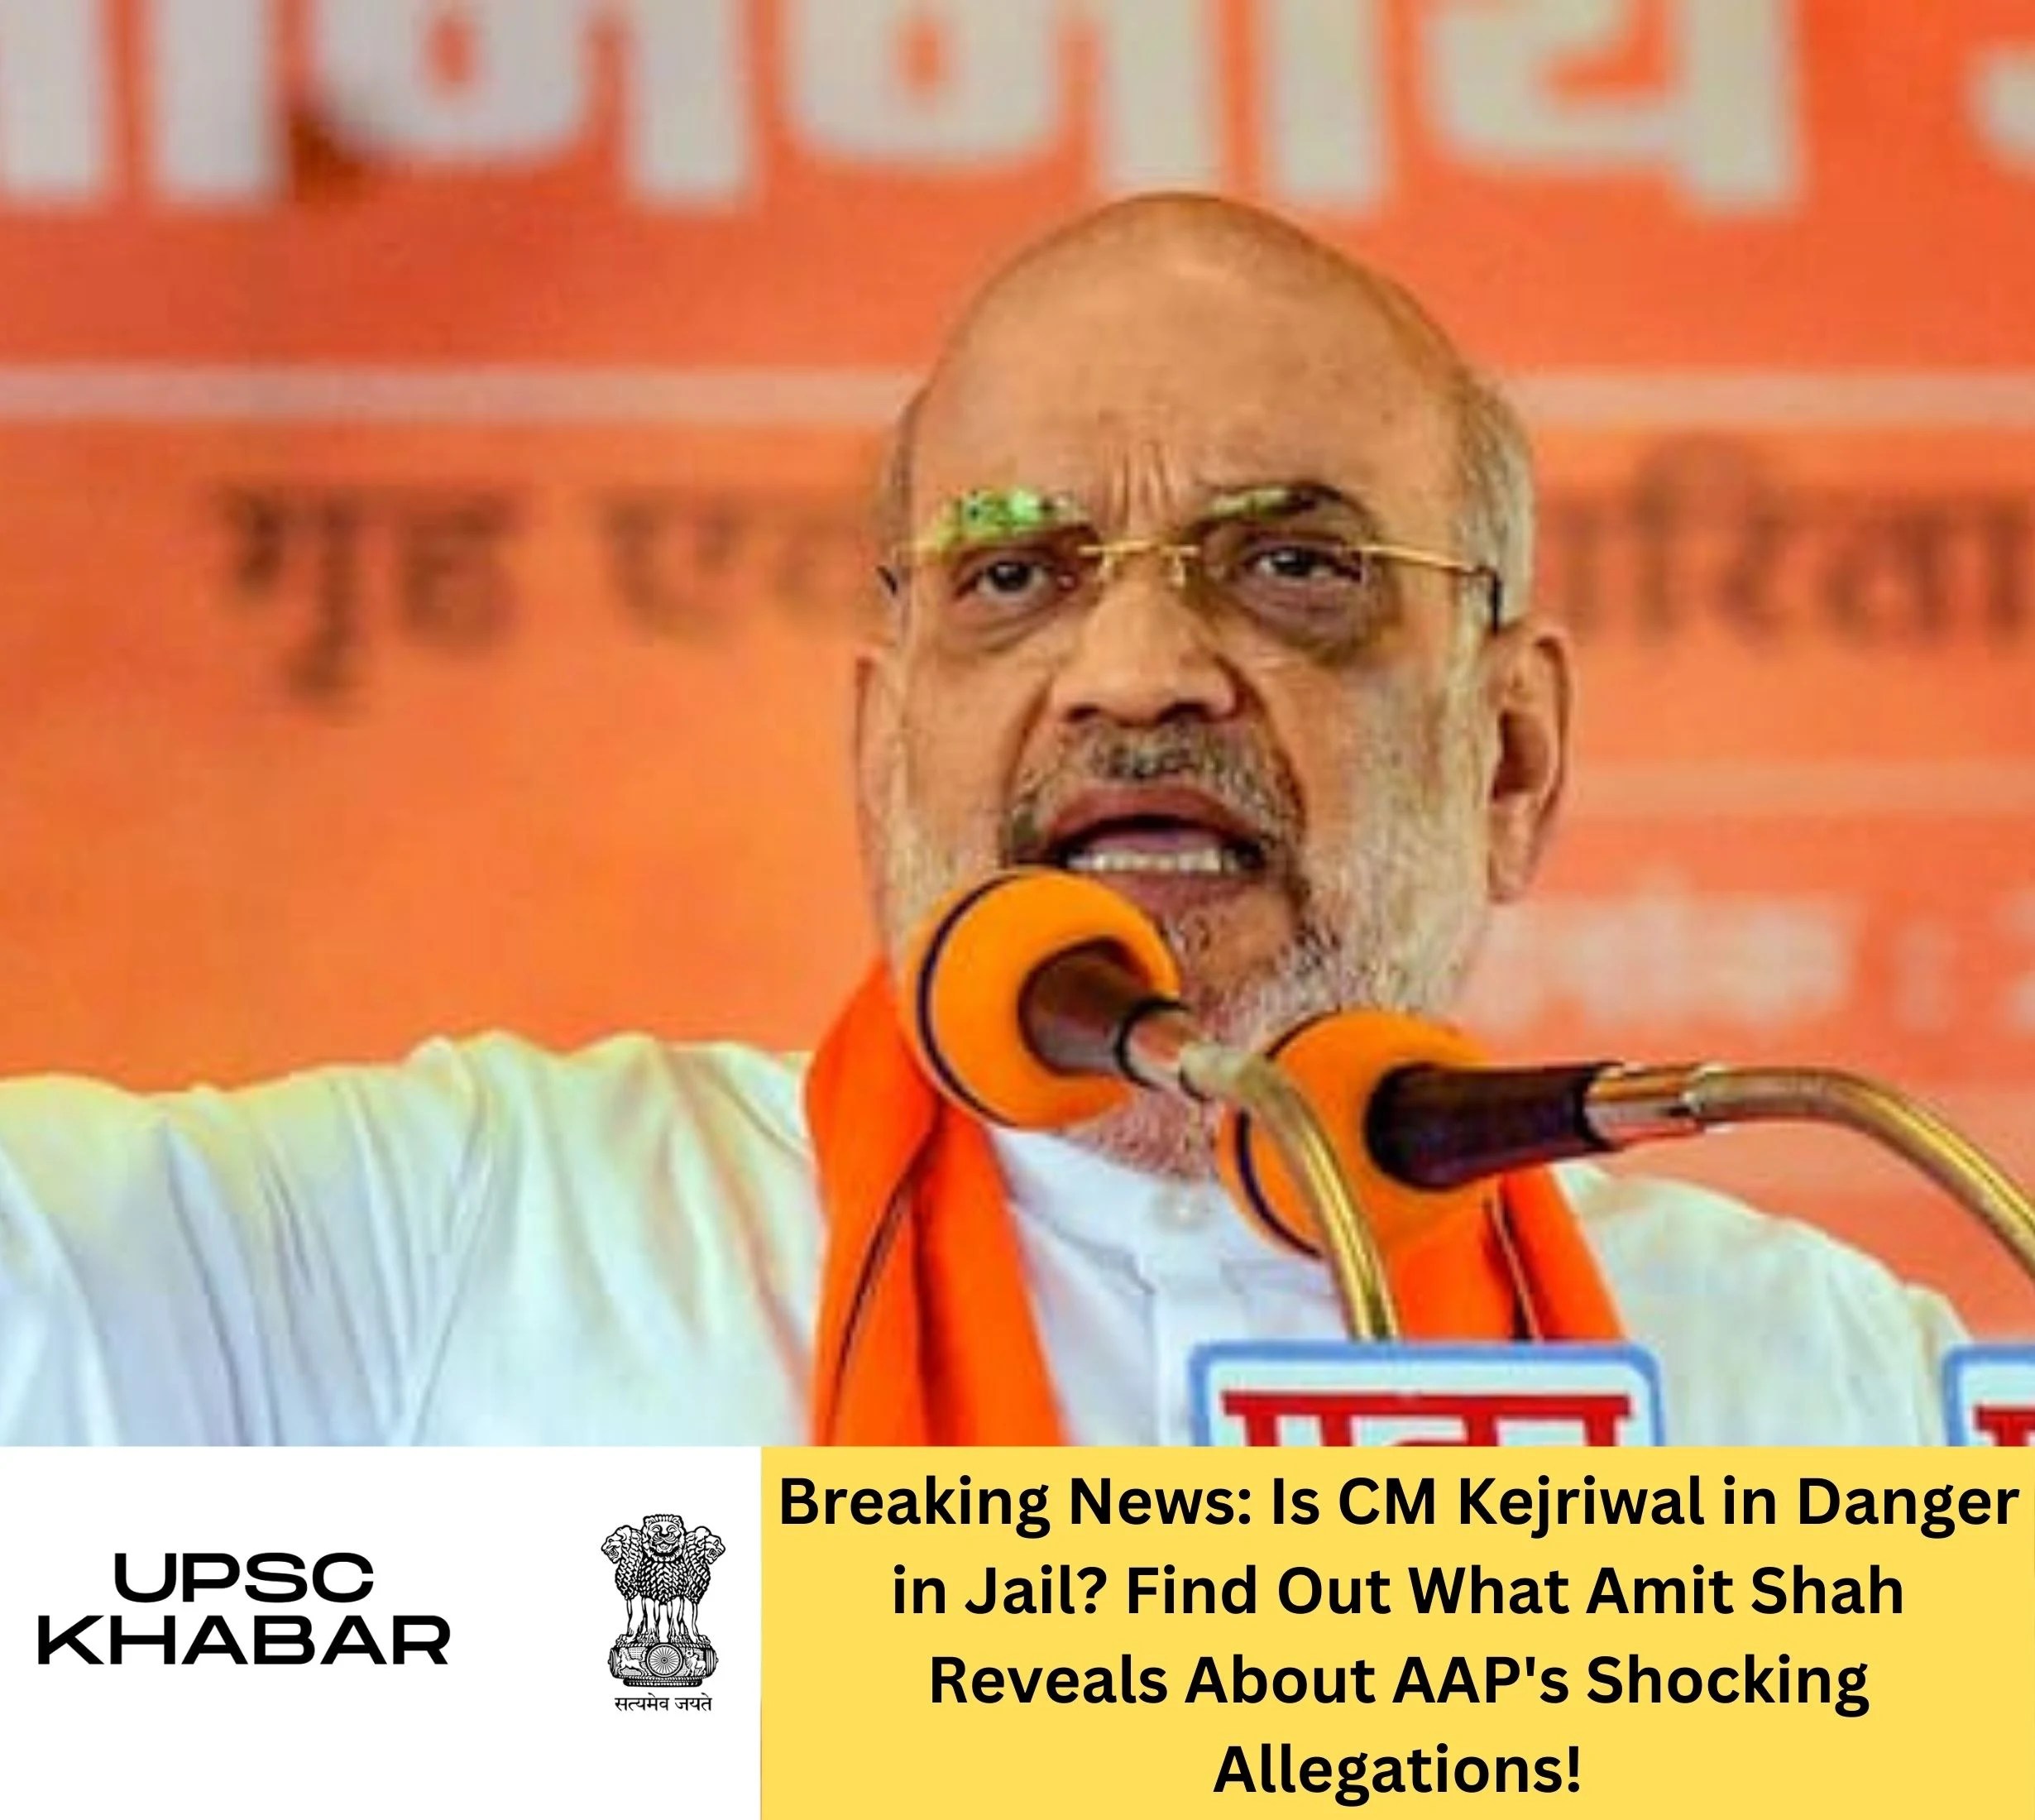 Breaking News: Is CM Kejriwal in Danger in Jail? Find Out What Amit Shah Reveals About AAP's Shocking Allegations!